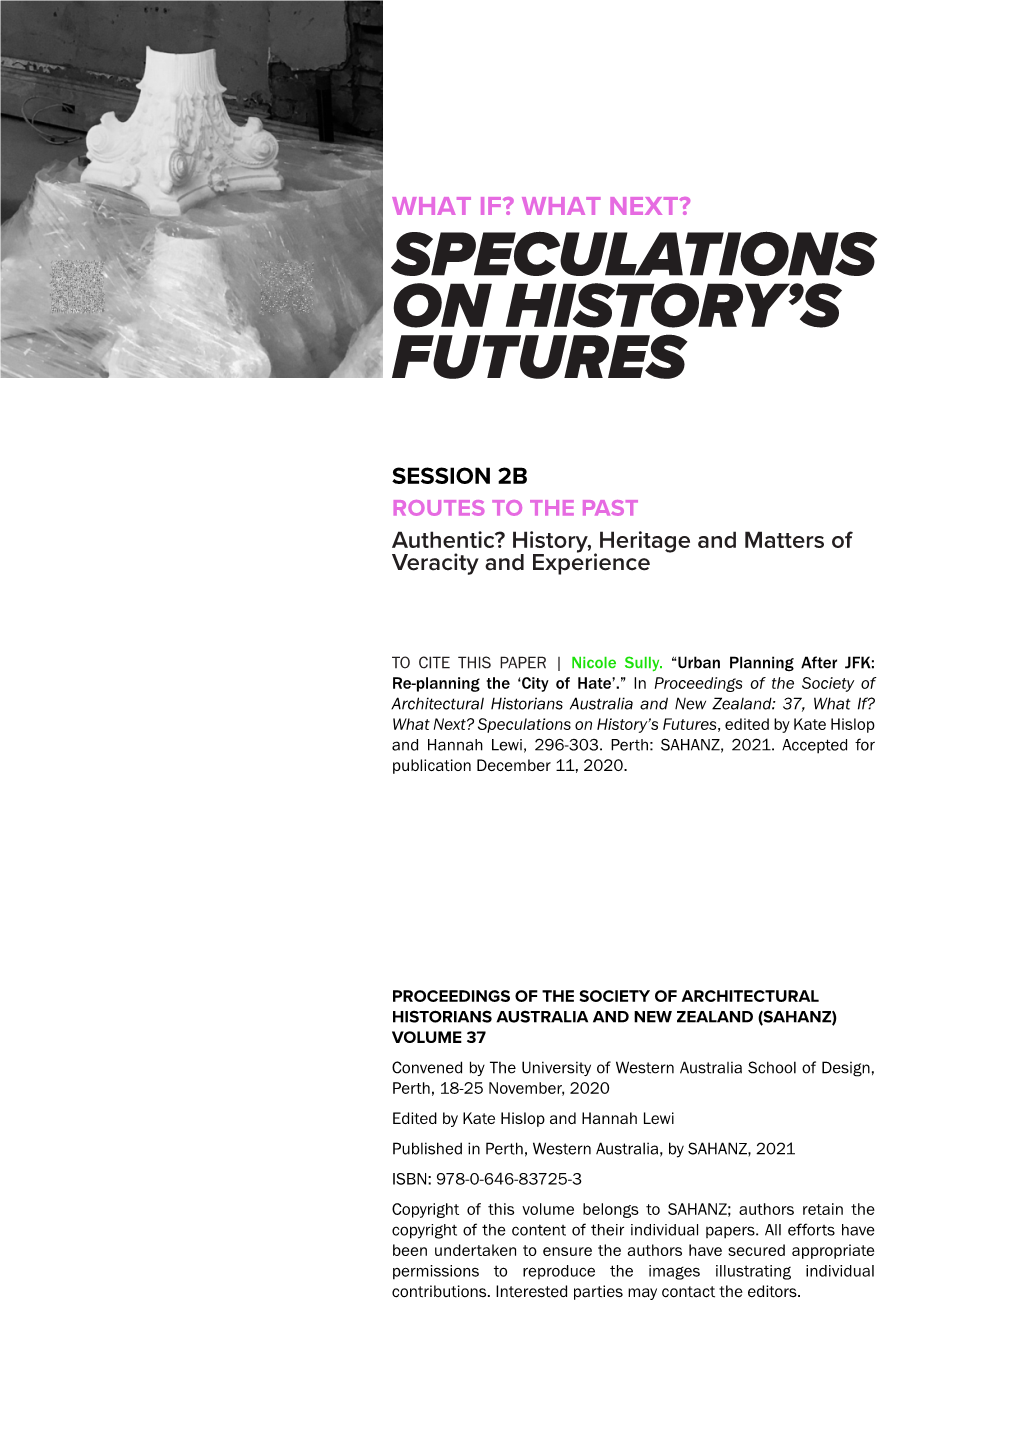 Speculations on History's Futures